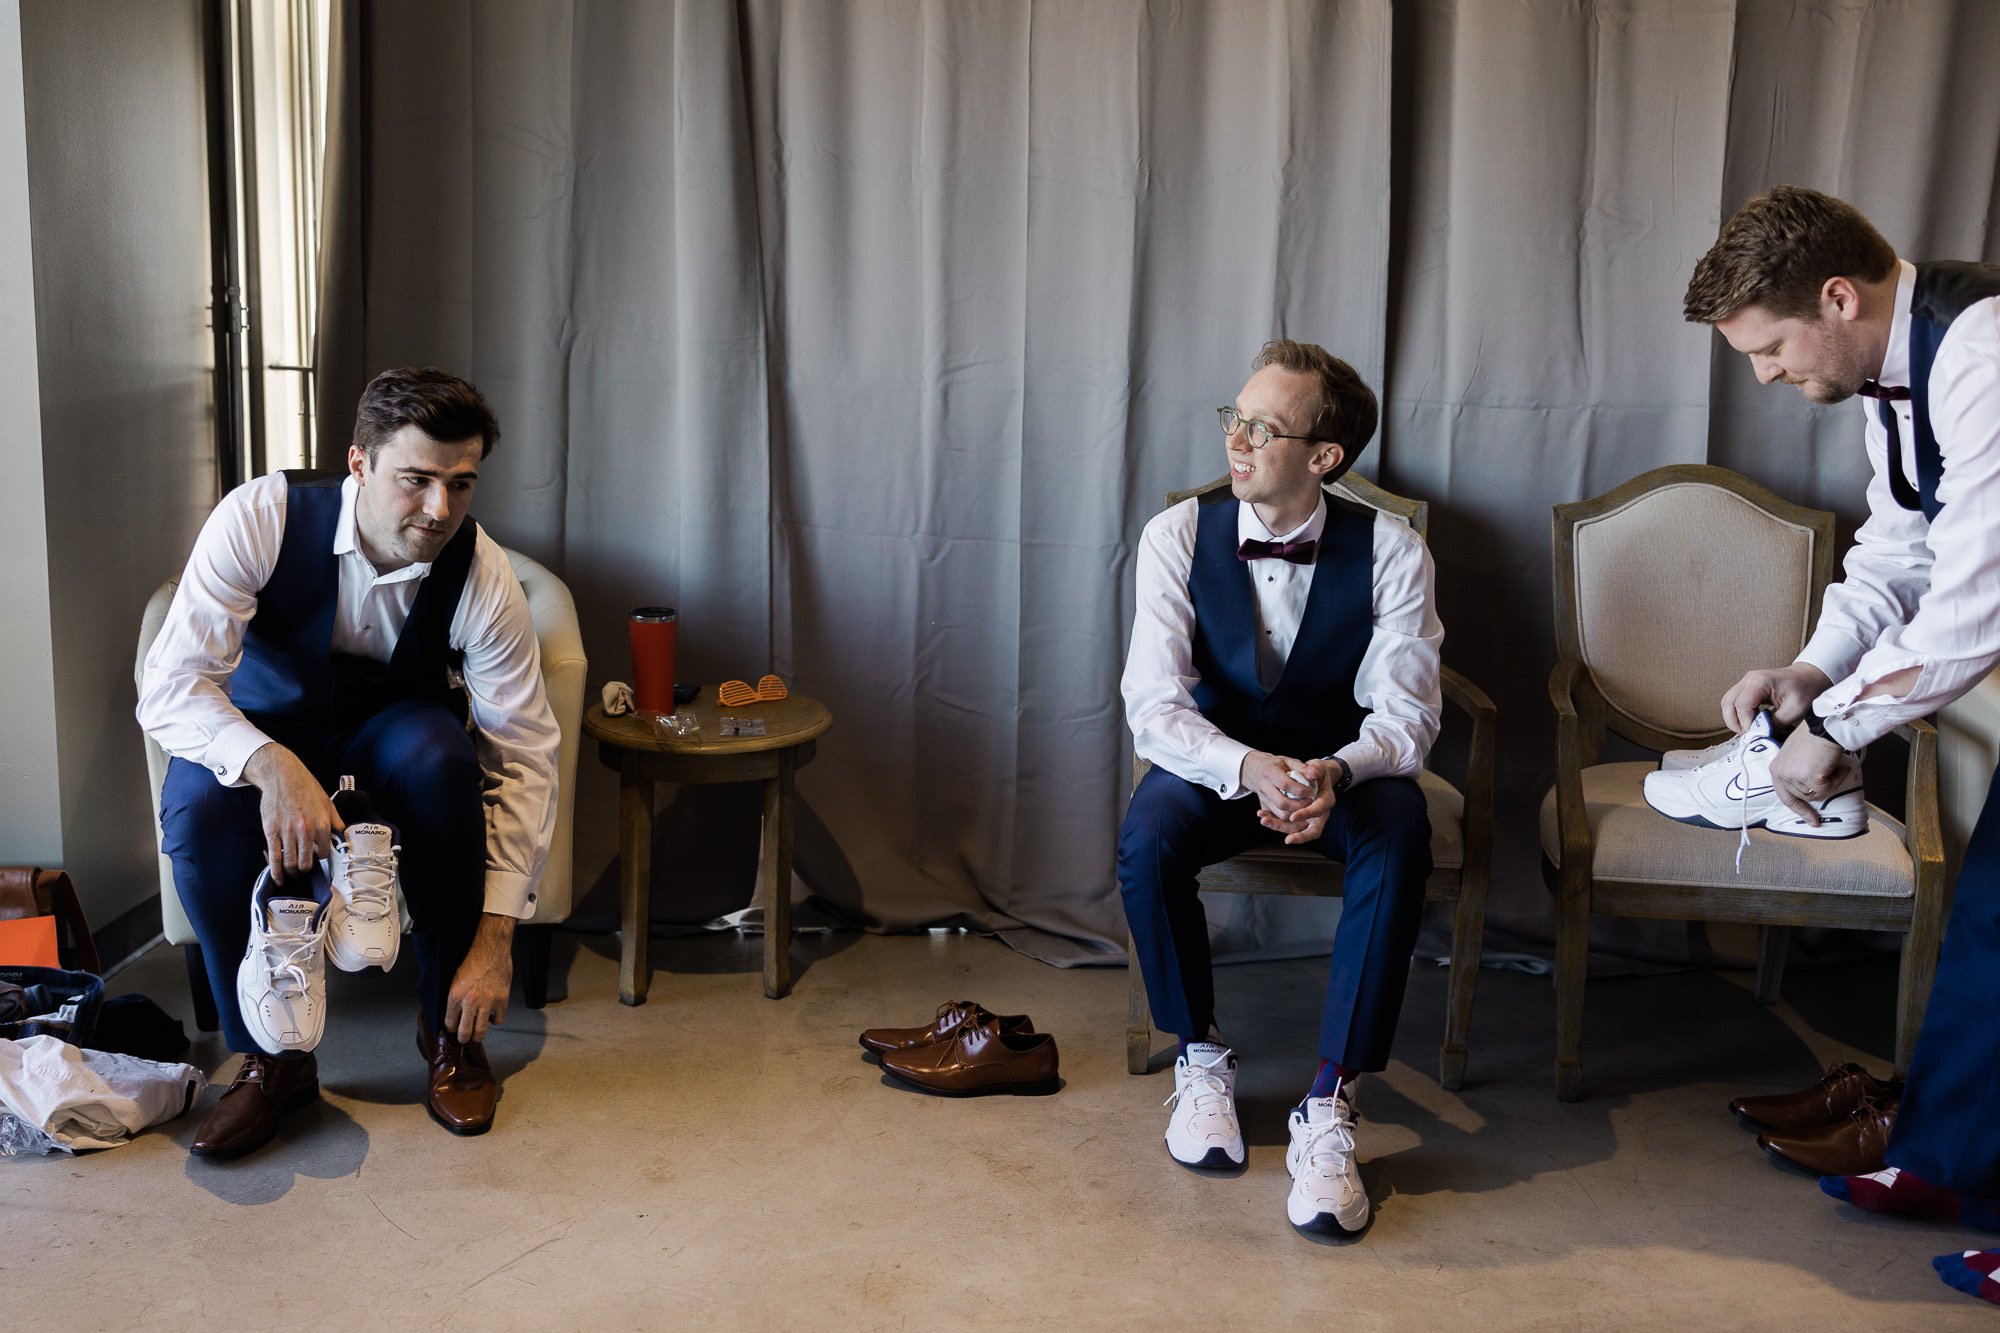 two men in white shirts and blue pants sit while putting on tennis shoes as a third man stands and ties shoe on chair